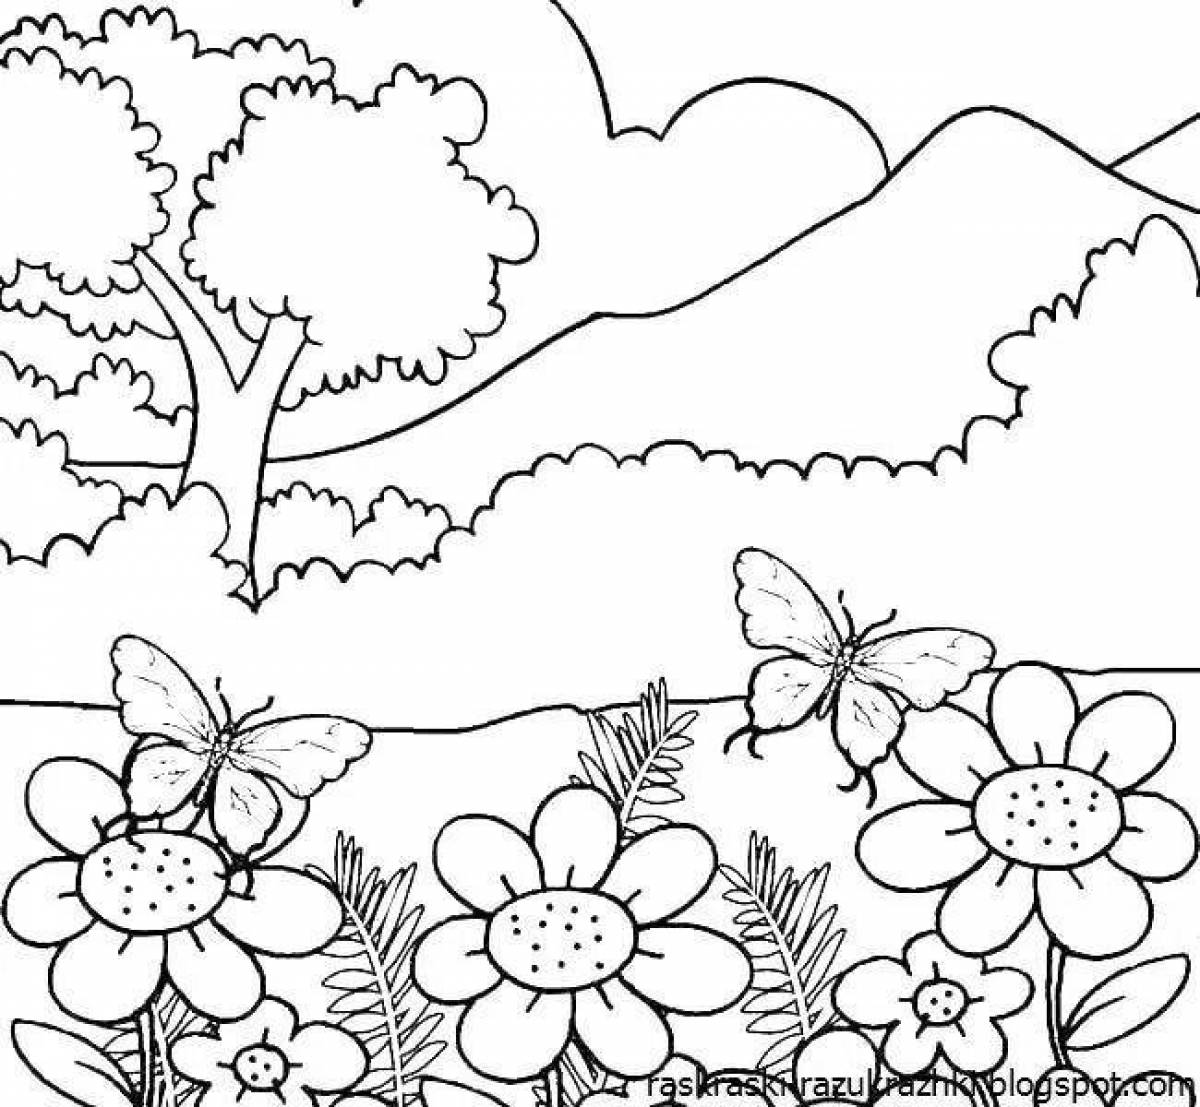 Adorable nature coloring book for 6-7 year olds